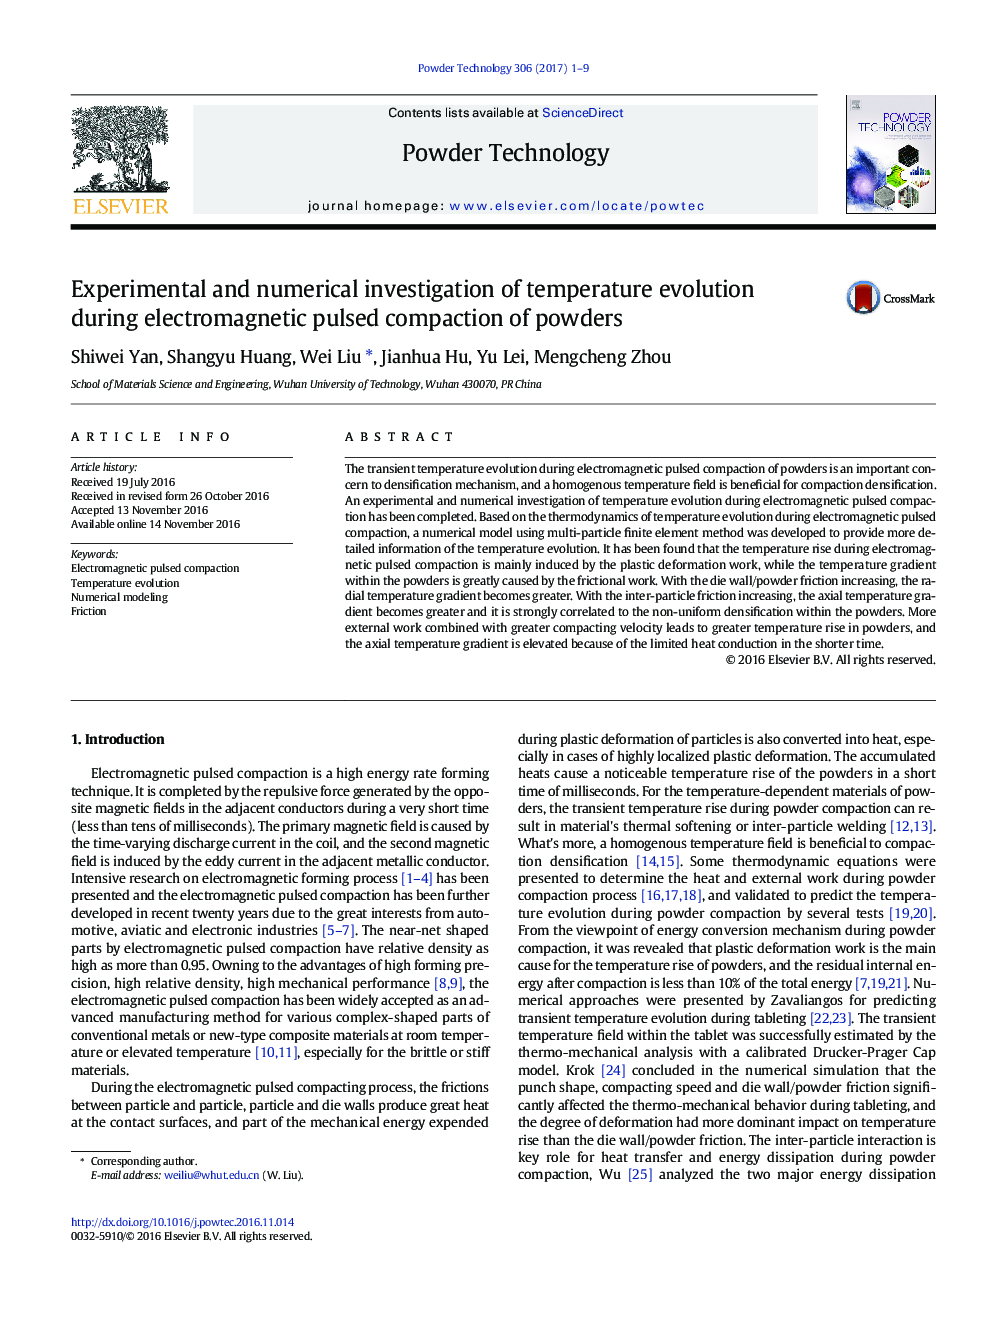 Experimental and numerical investigation of temperature evolution during electromagnetic pulsed compaction of powders